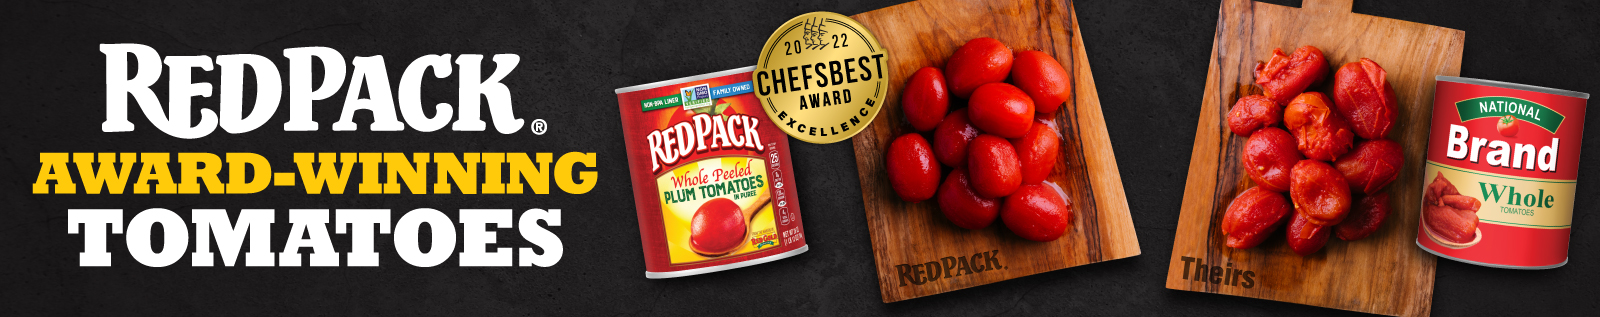 Banner comparing Redpack Award-winning Tomatos to a competitor